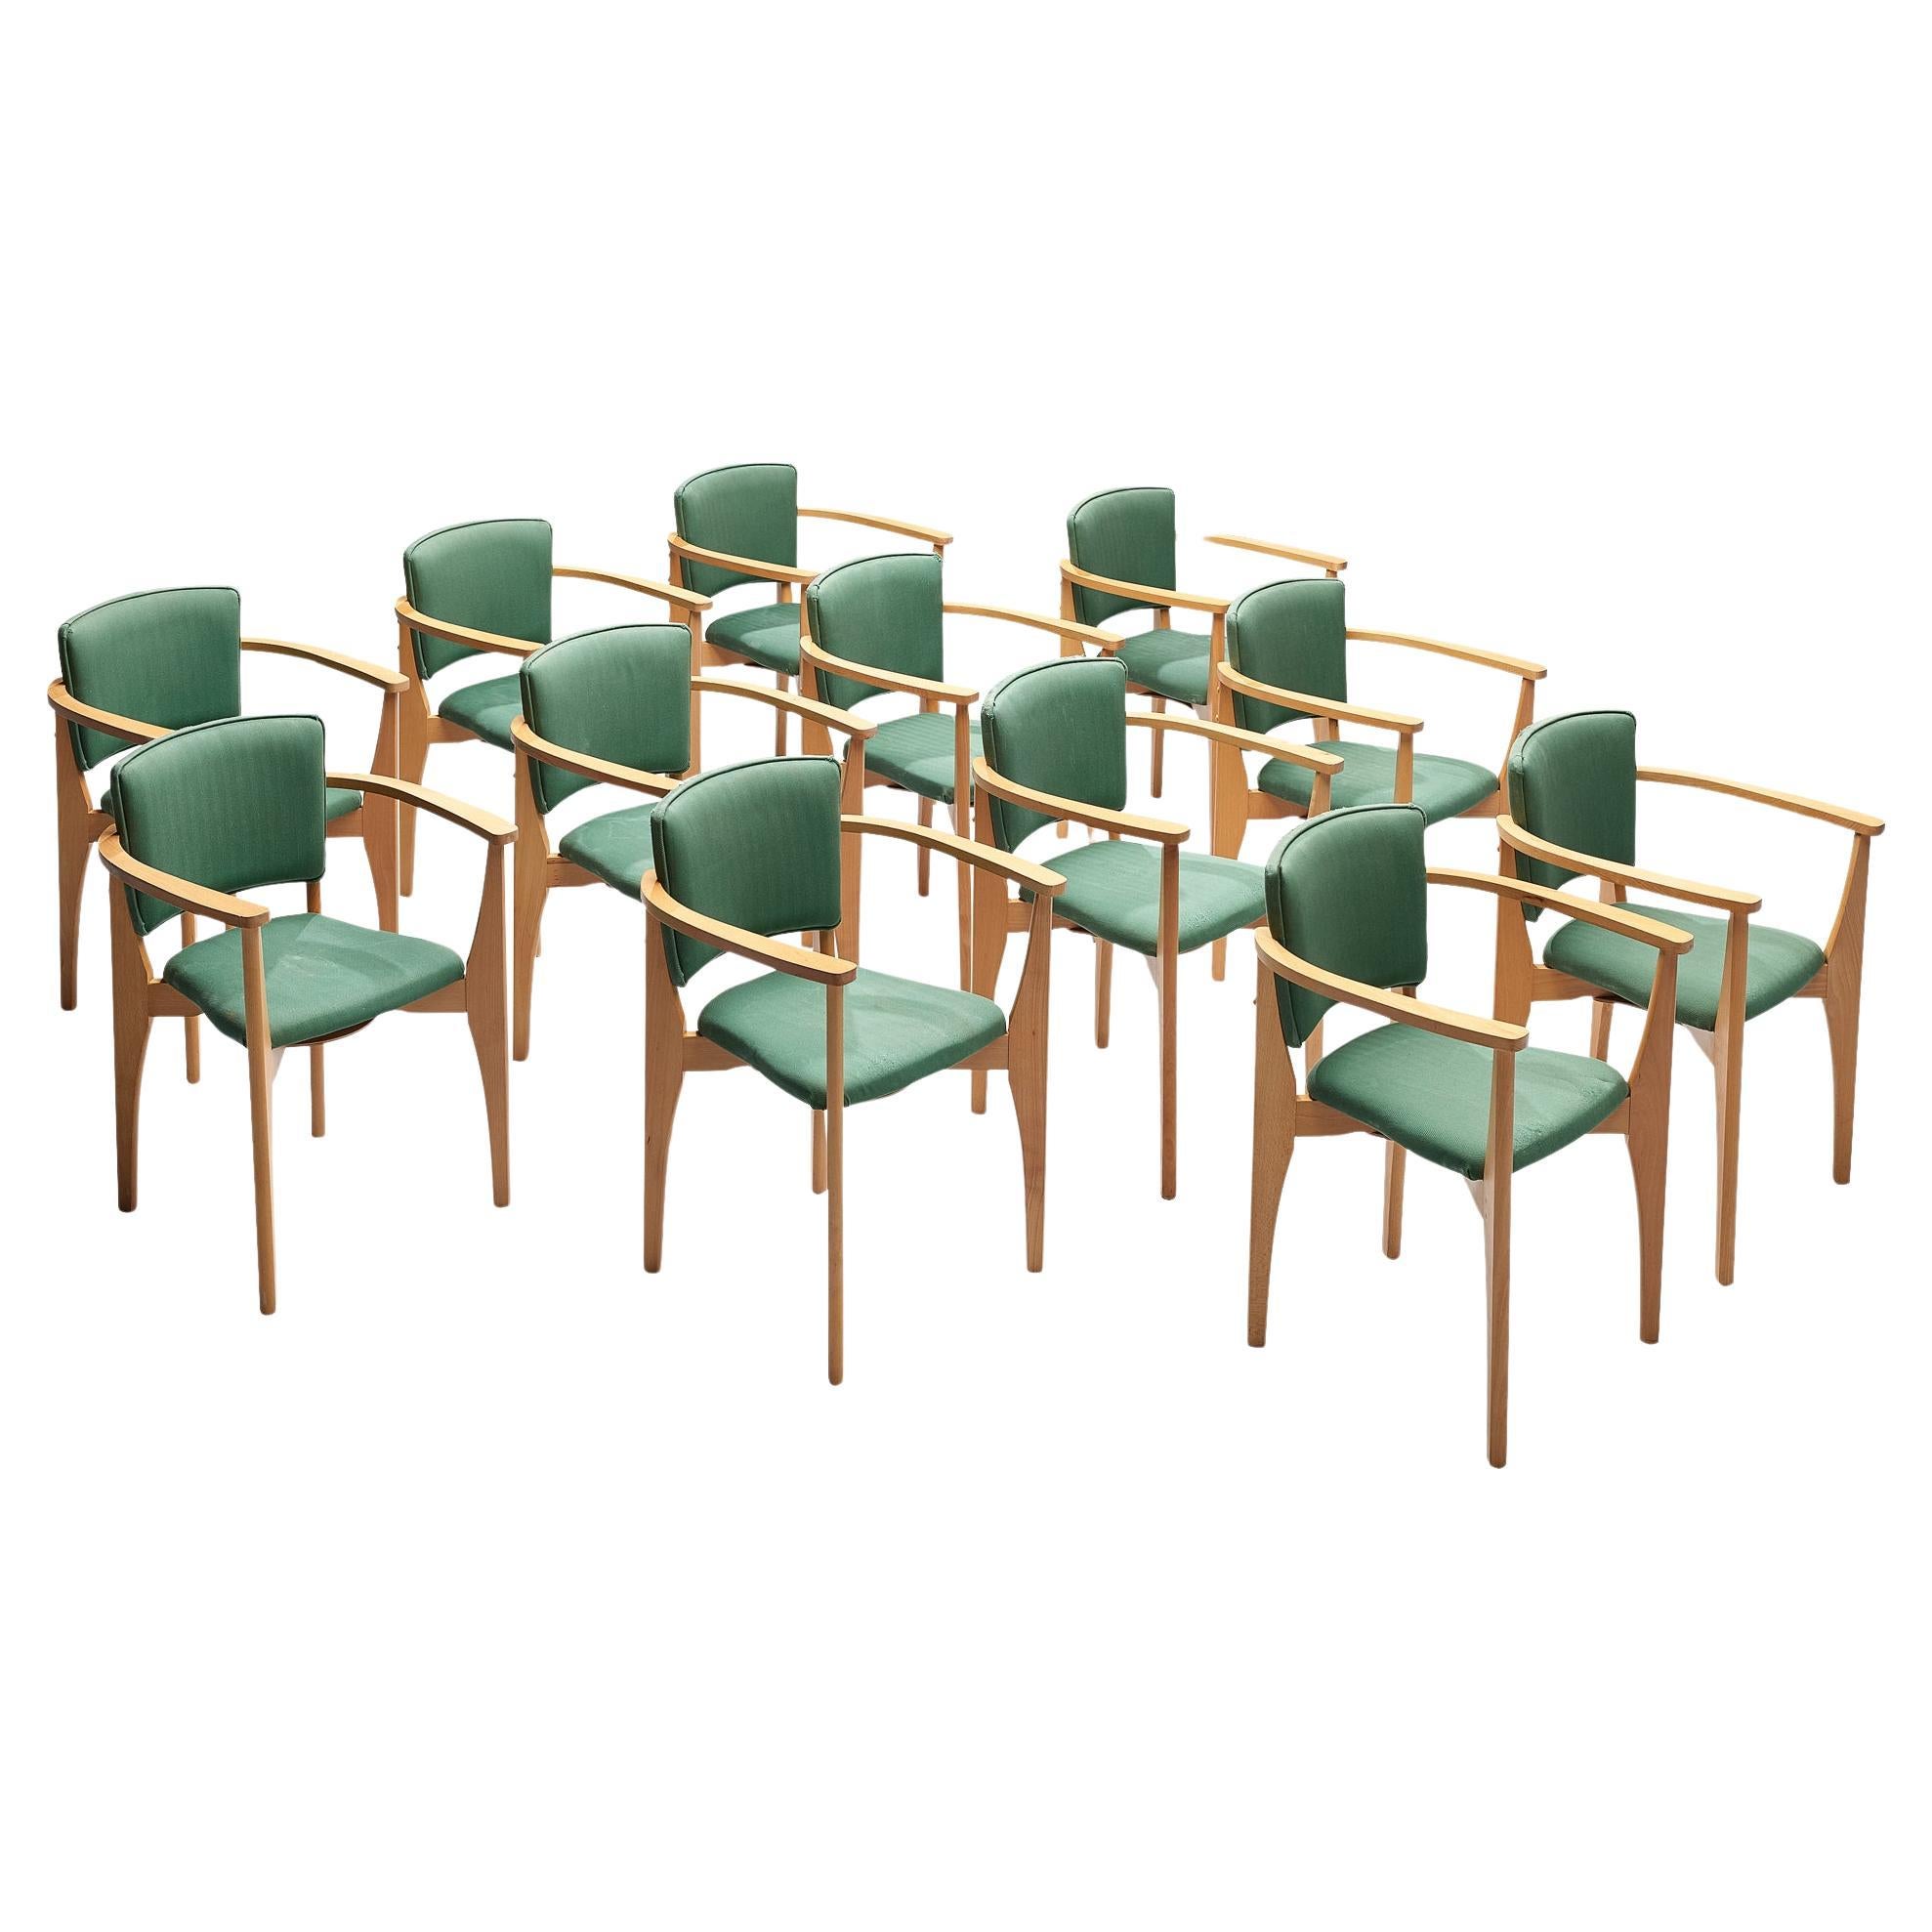 Set of Twelve Dining Chairs With Elegant Wooden Frames 